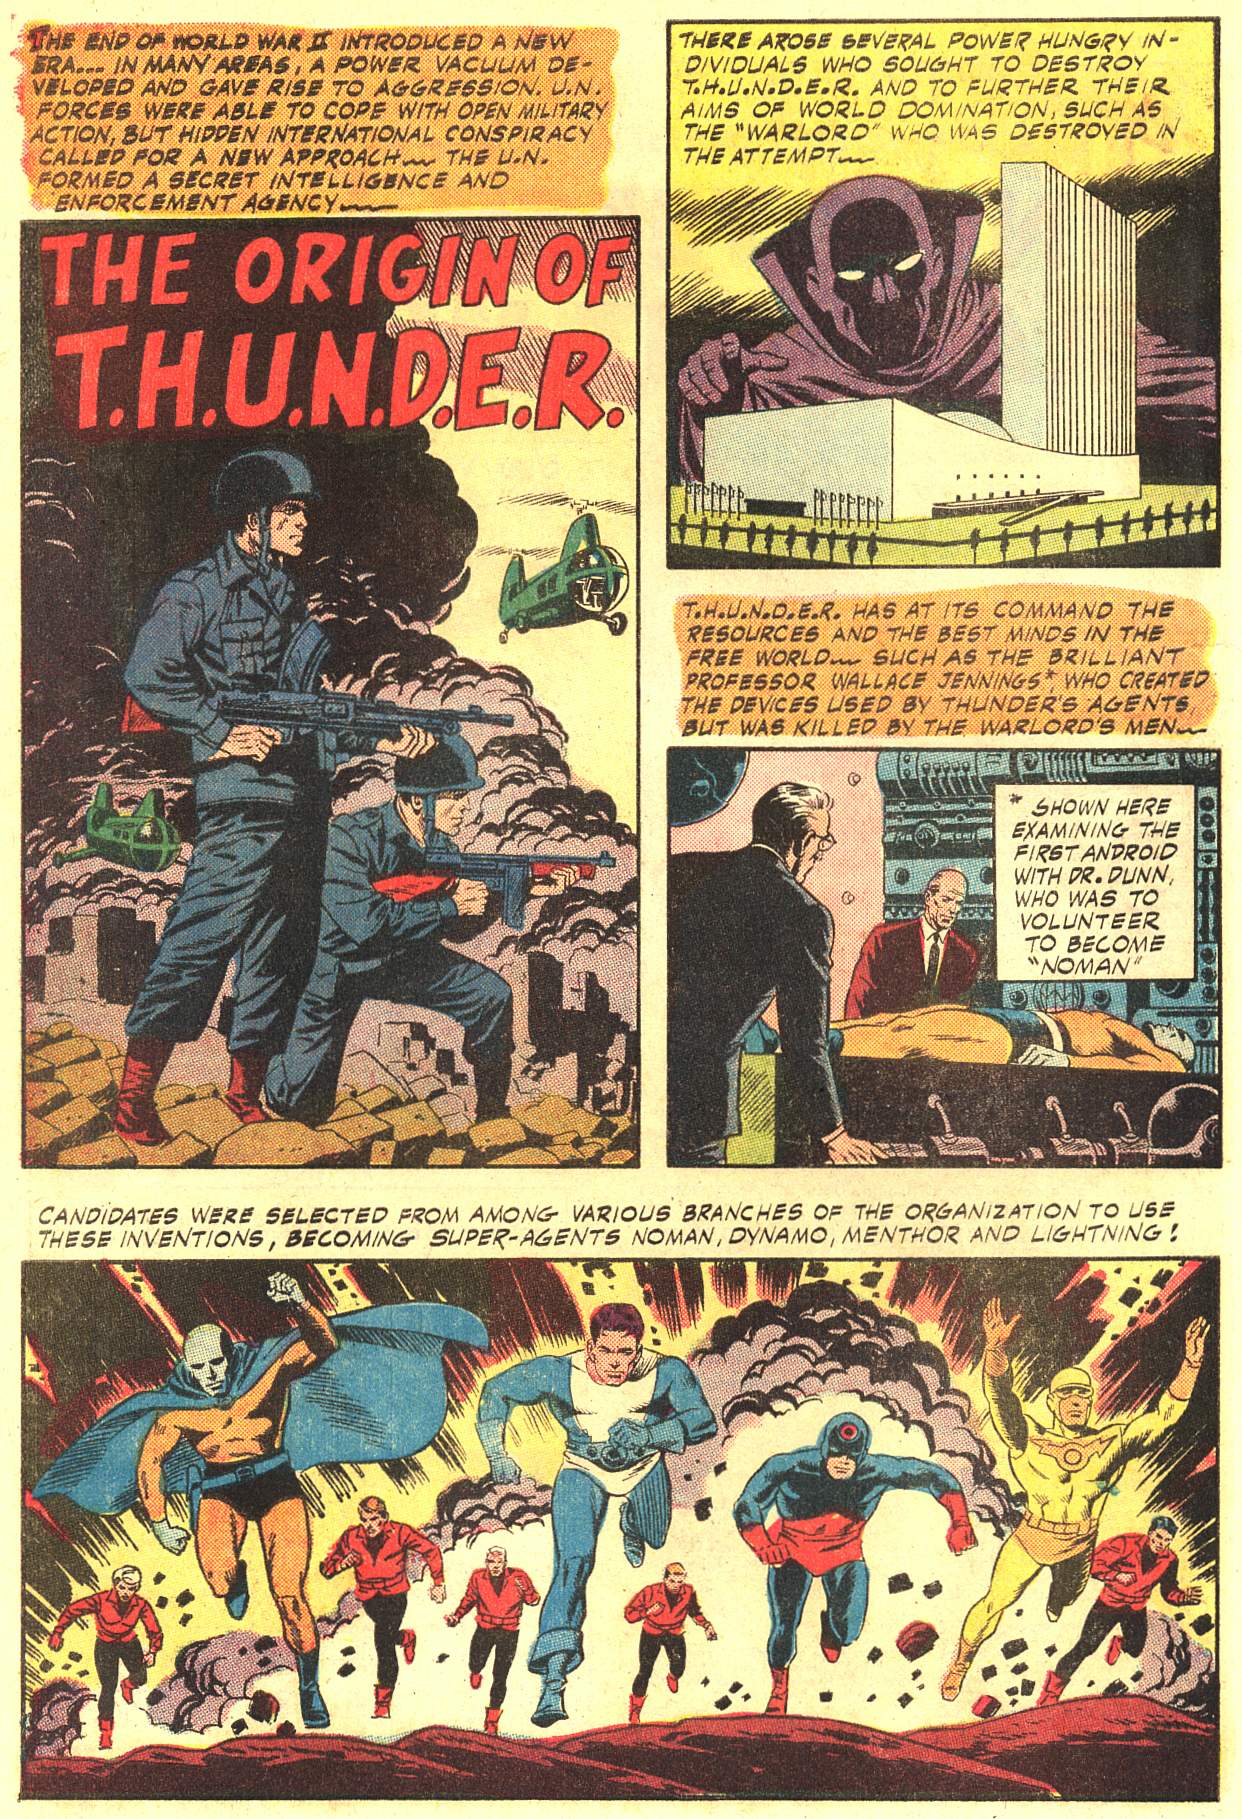 Read online T.H.U.N.D.E.R. Agents (1965) comic -  Issue #4 - 32